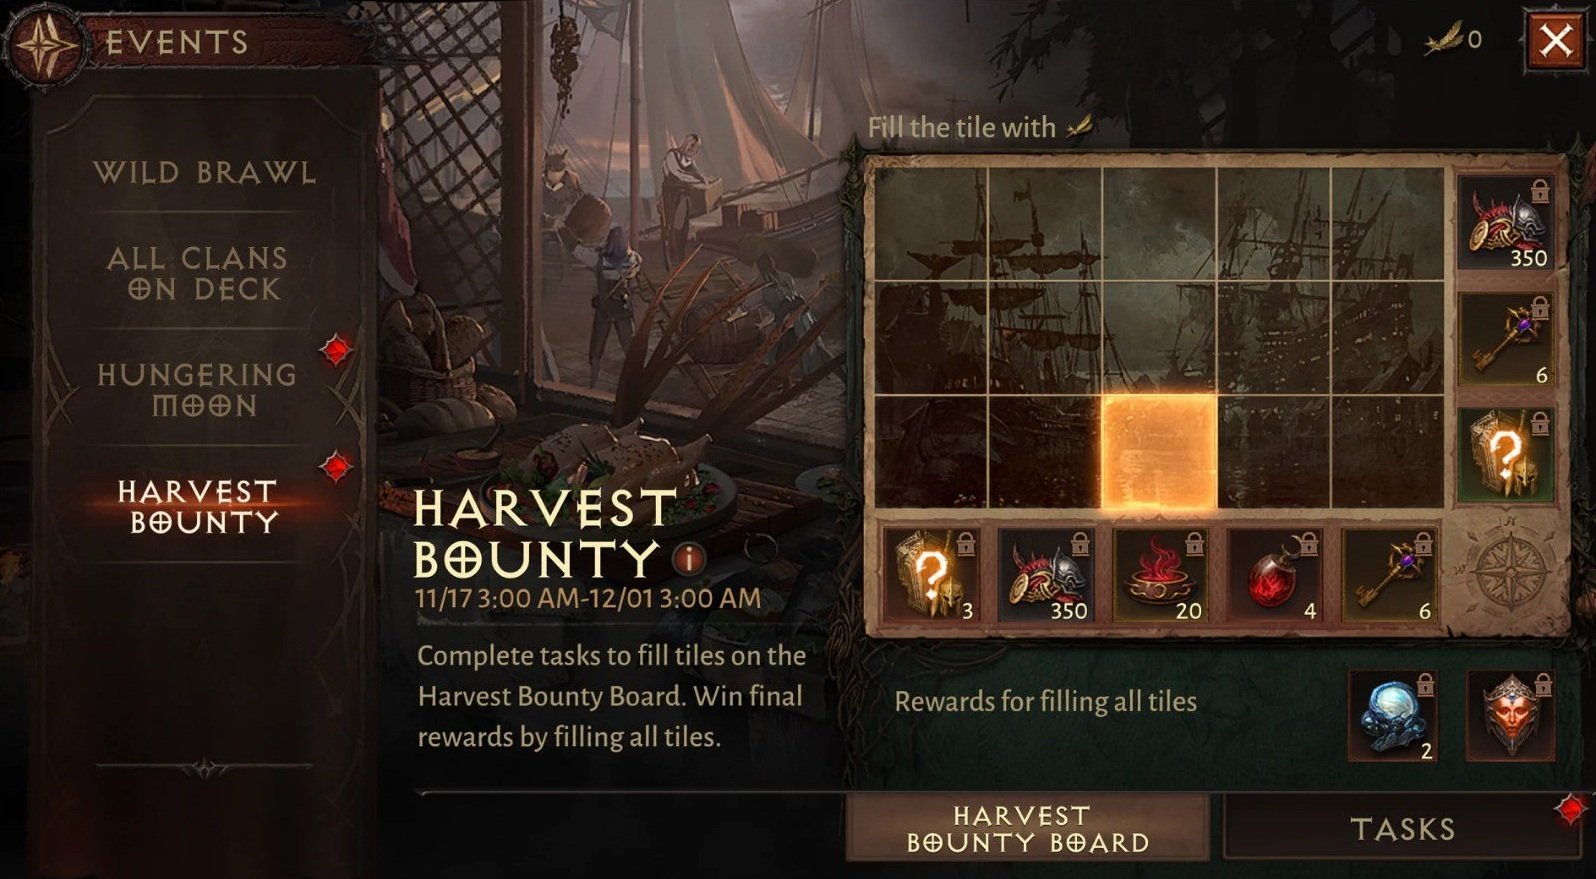 In the video game Diablo Immortal, the reward for completing a